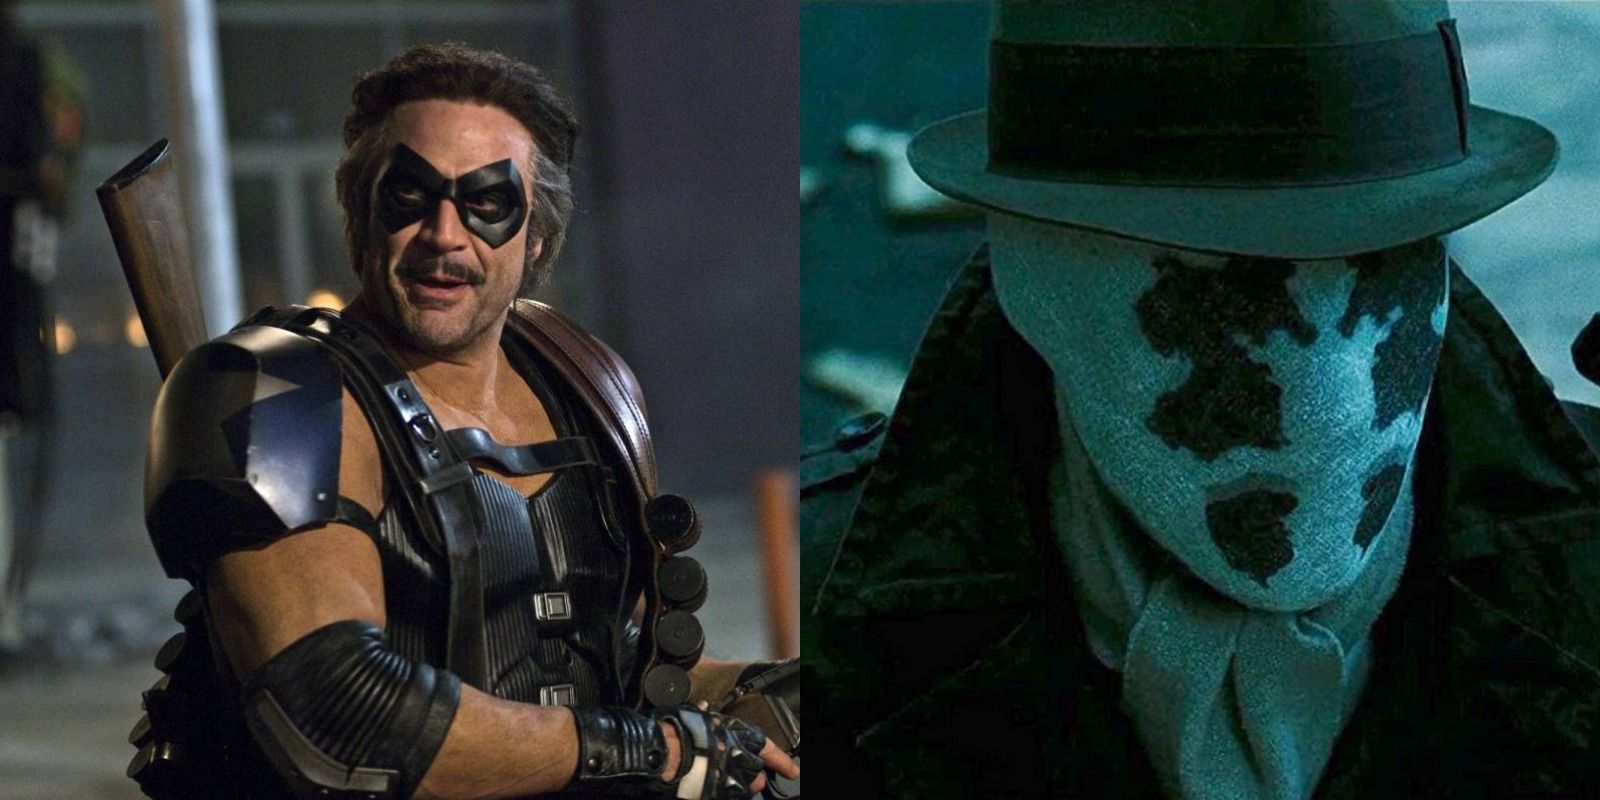 Split image of The Comedian and Rorschach from Watchmen